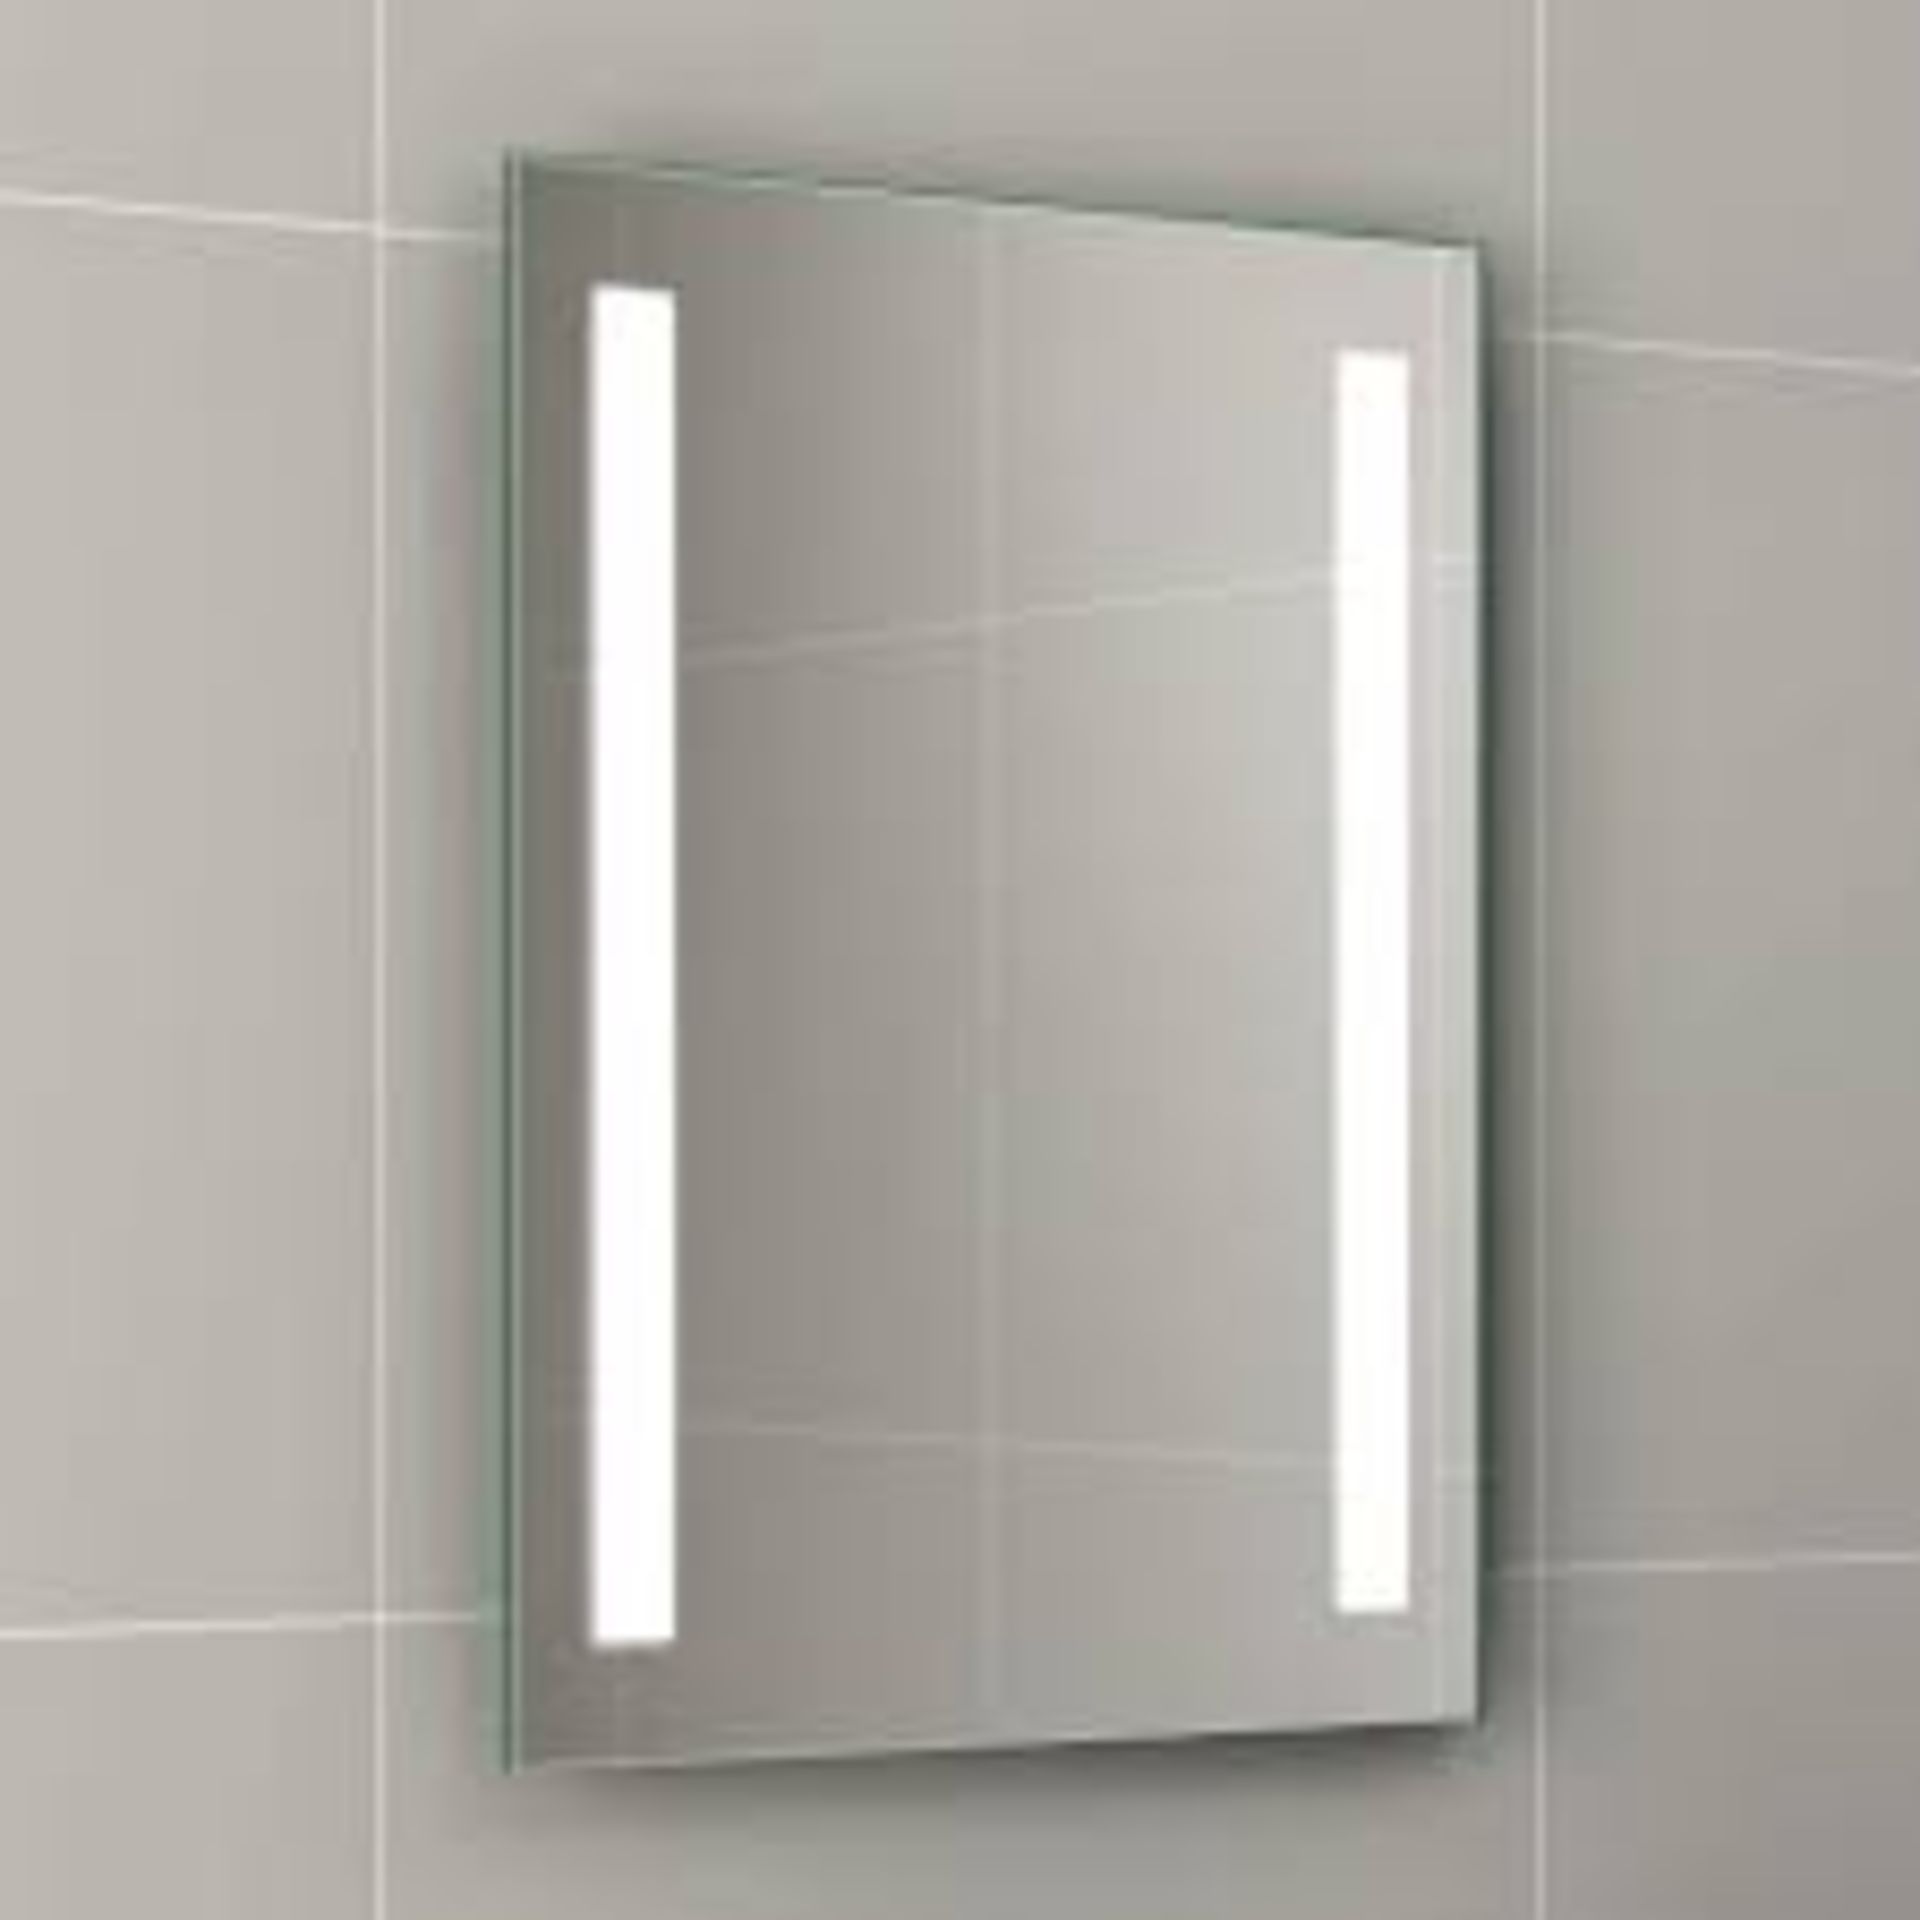 (J120) 500x700mm Omega LED Mirror - Battery Operated. RRP £299.99. Energy saving controlled On / Off - Image 2 of 4